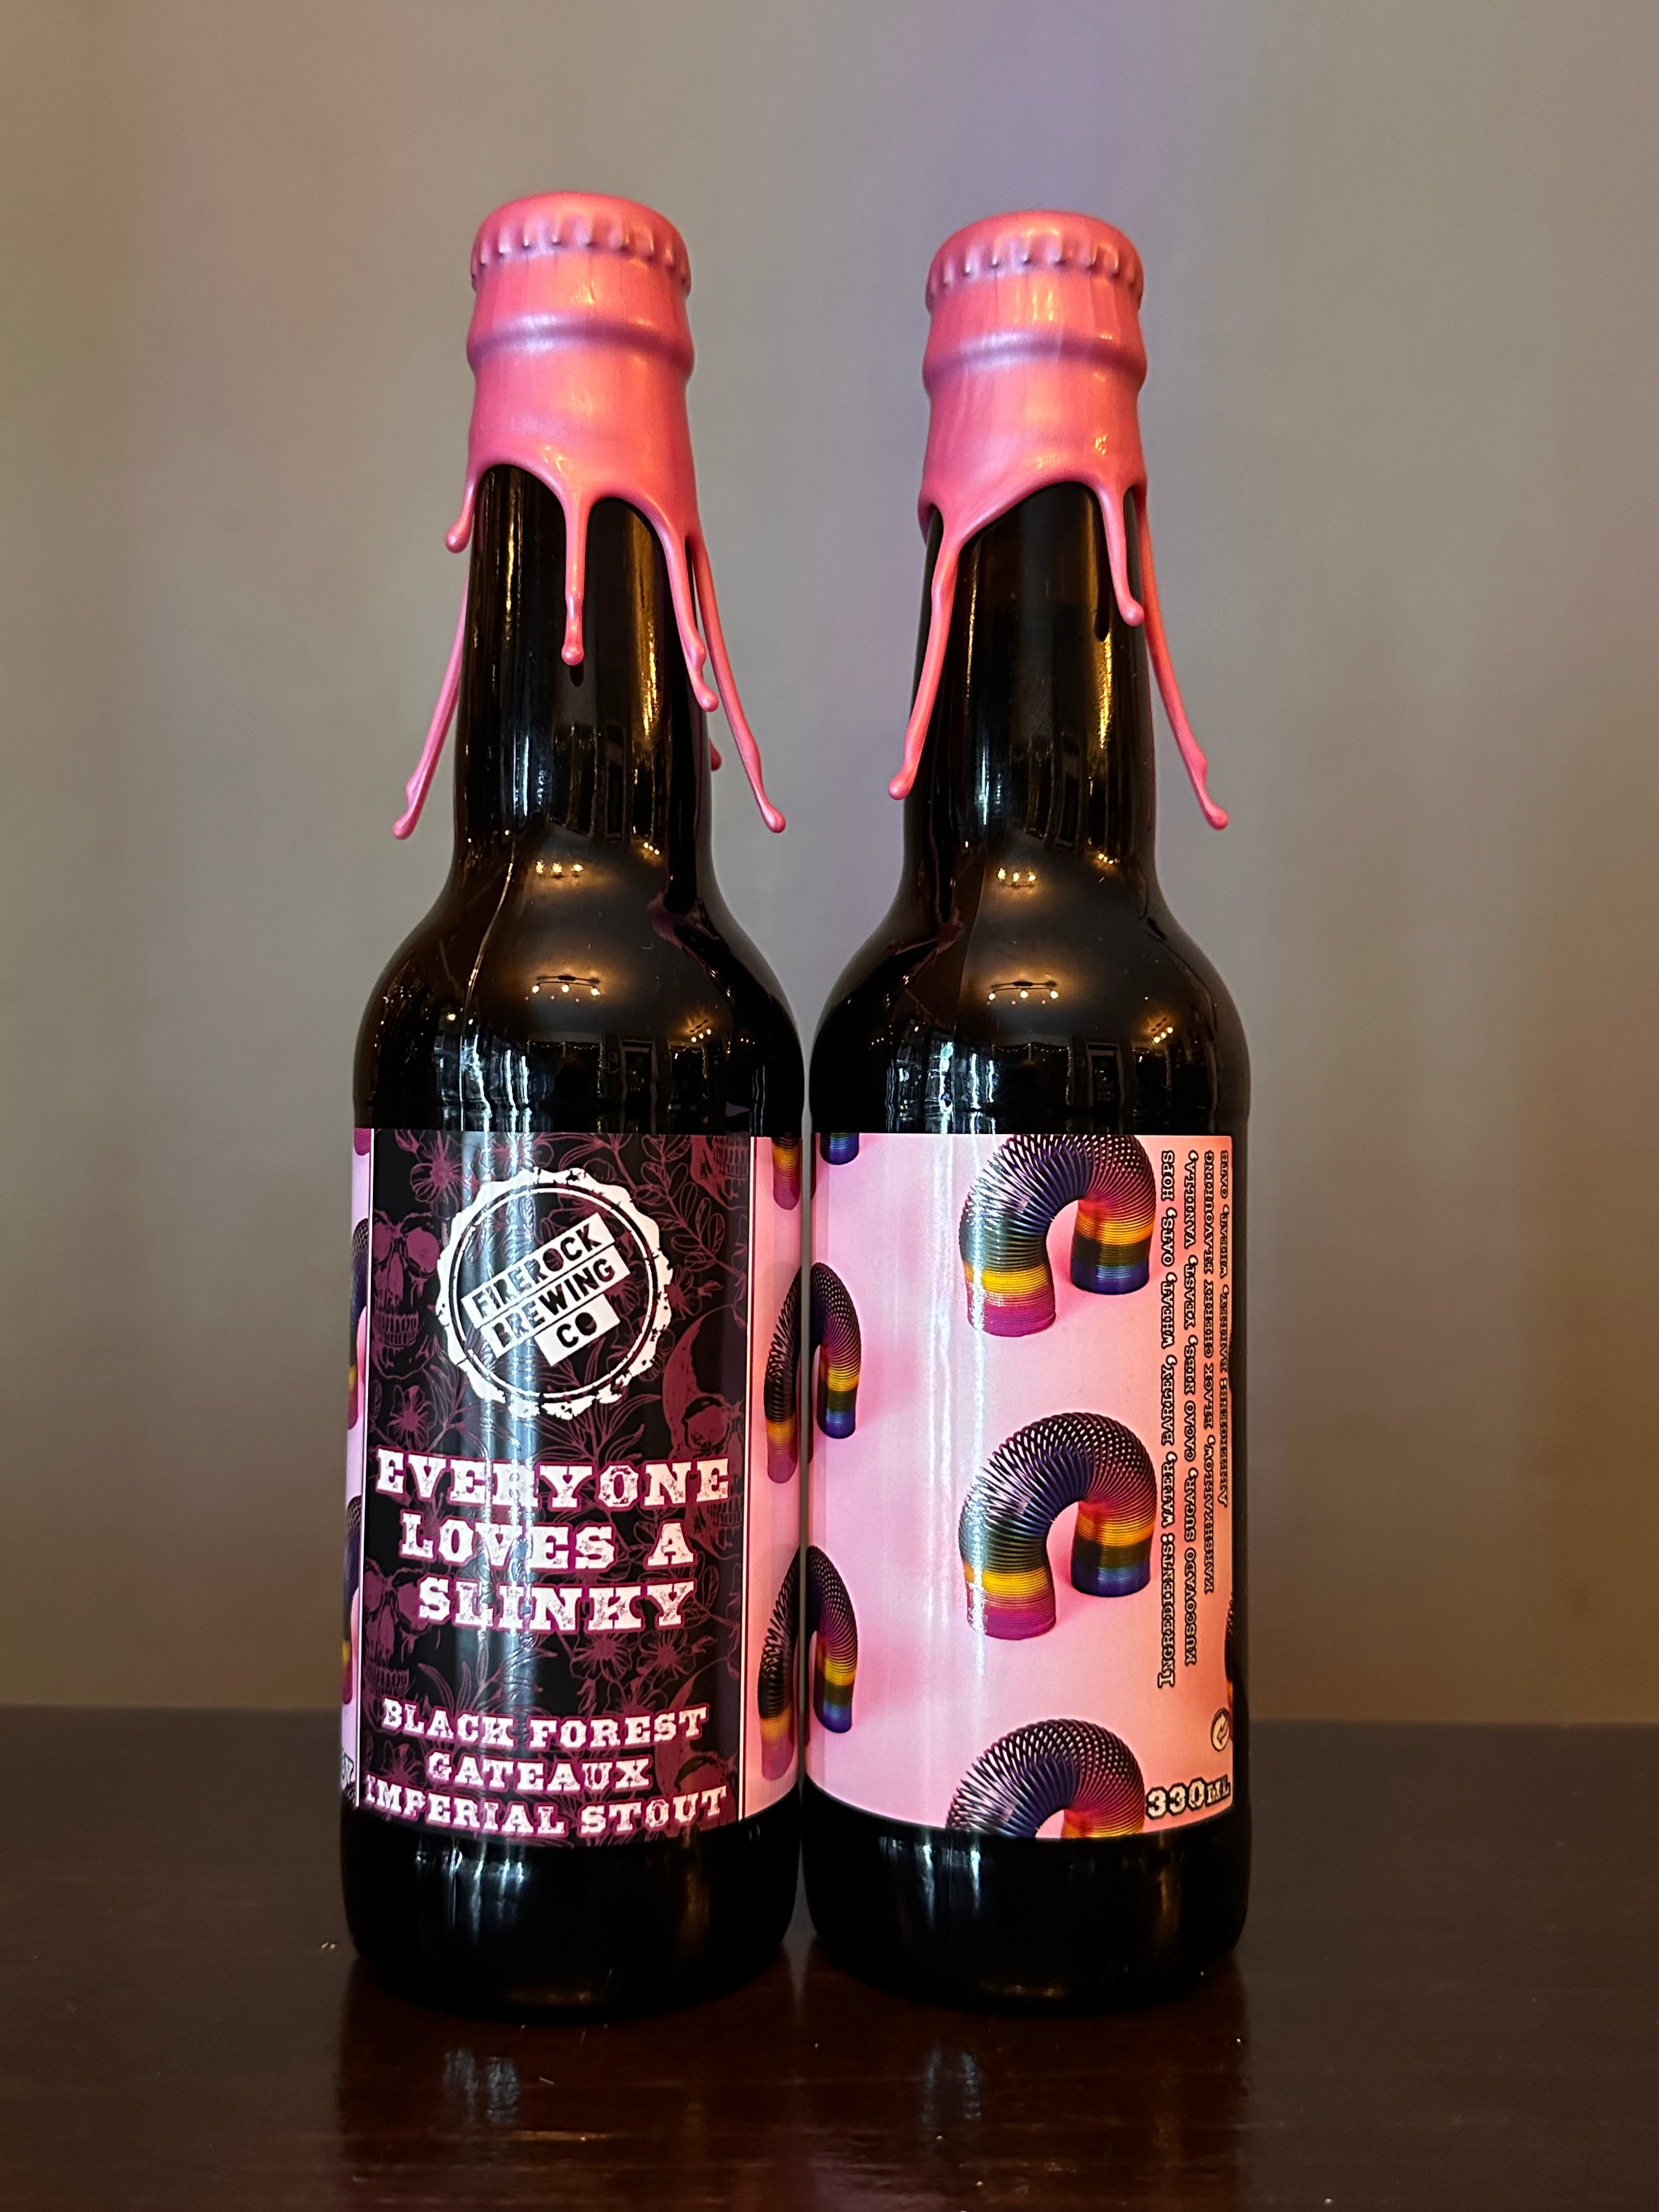 Fire Rock Everyone Loves a Slinky Black Forest Gateau Imperial Stout 12.4%